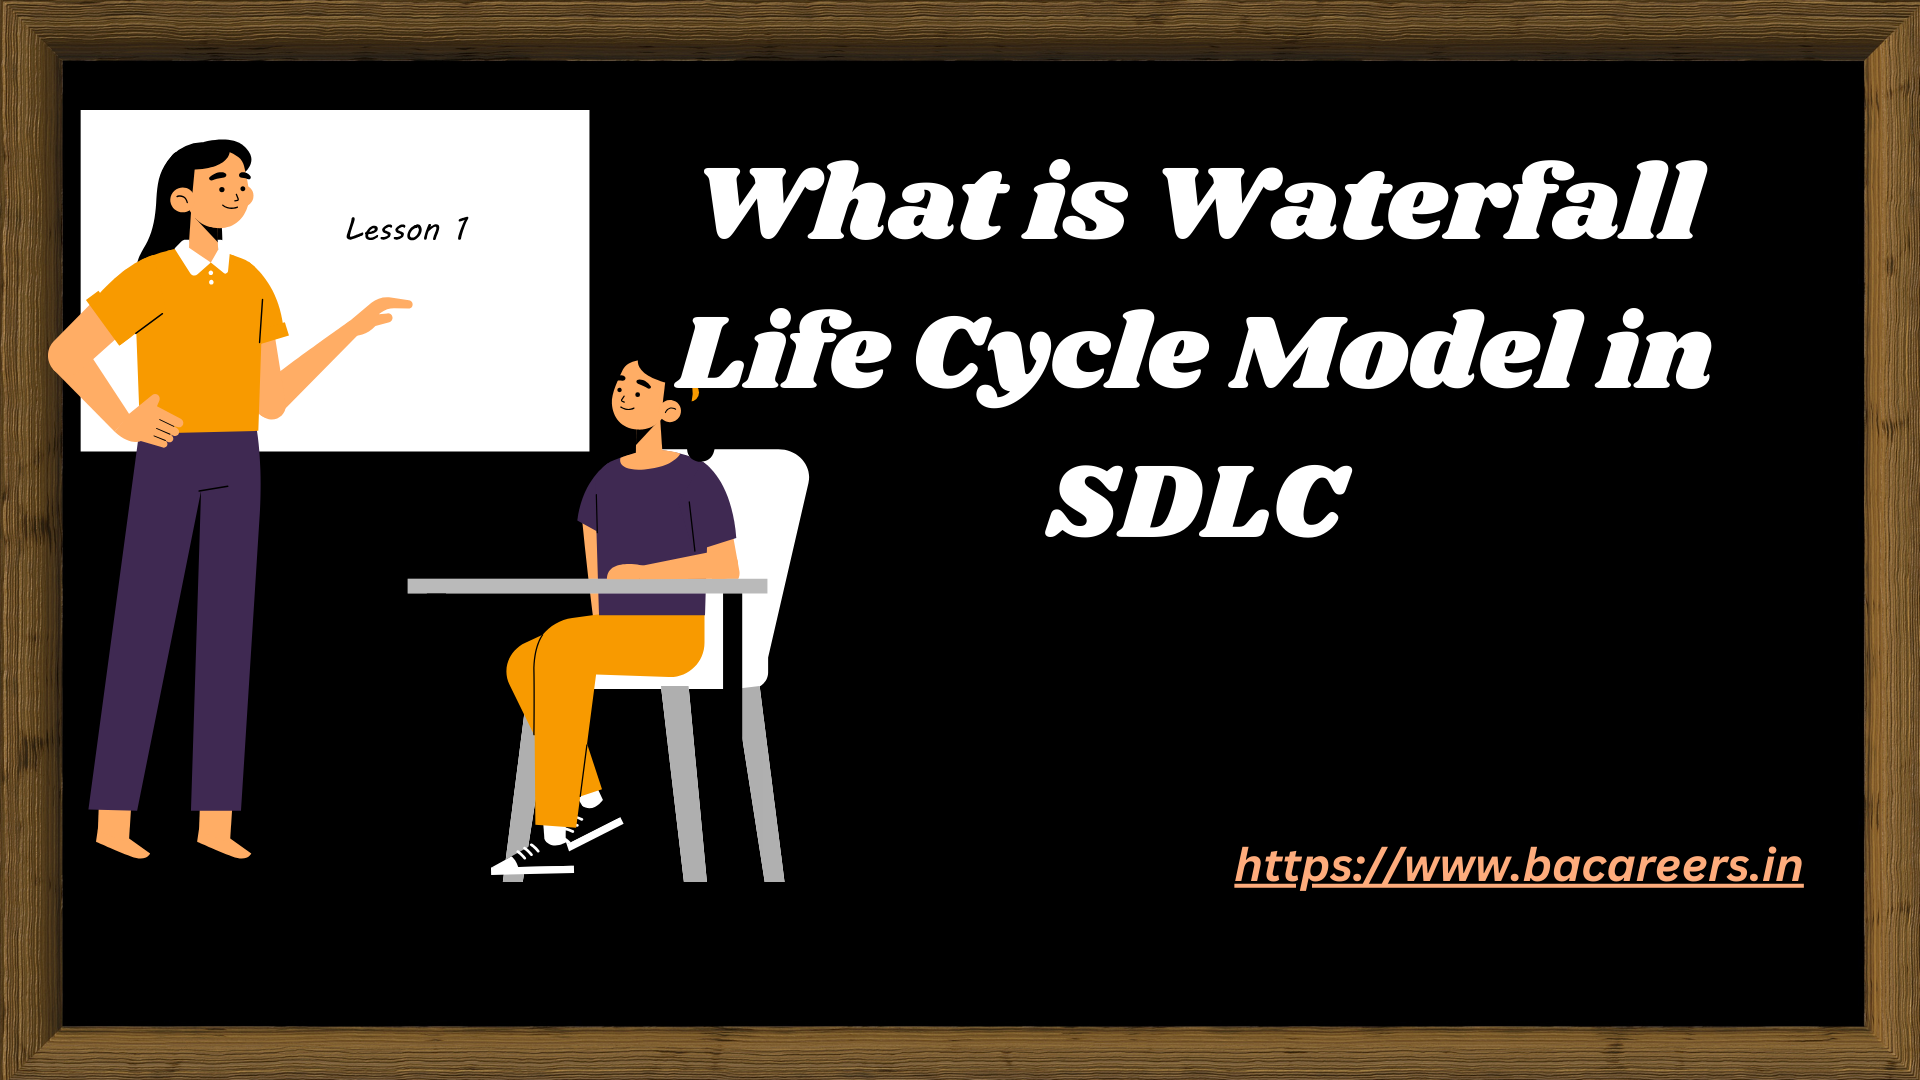 What is Waterfall Life Cycle Model in SDLC